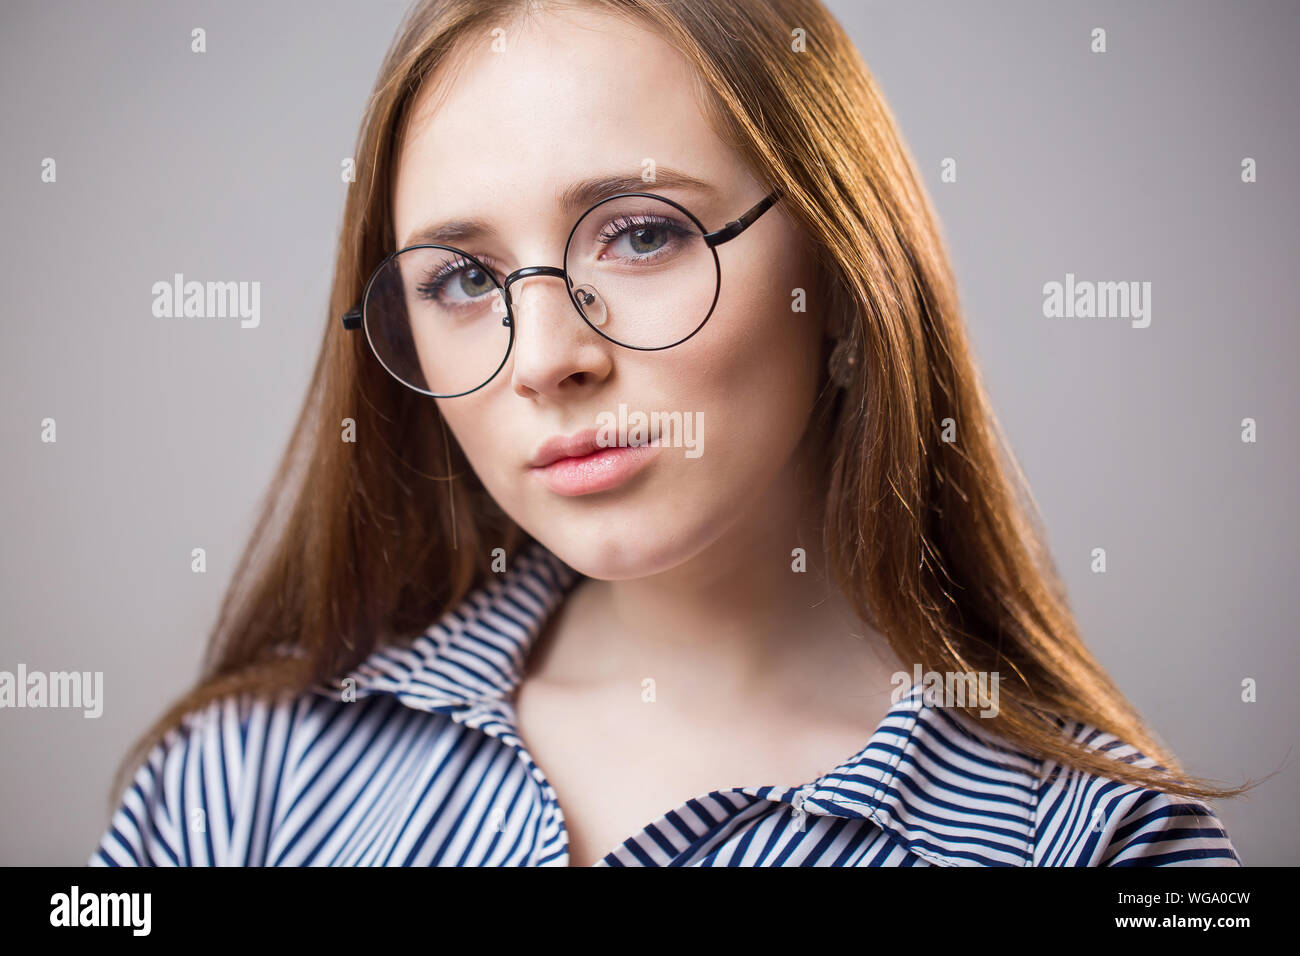 Beautiful closeup portrait of a young student girl wearing glasses on a  gray background. Attractive redhead woman with natural beauty looks at the  cam Stock Photo - Alamy